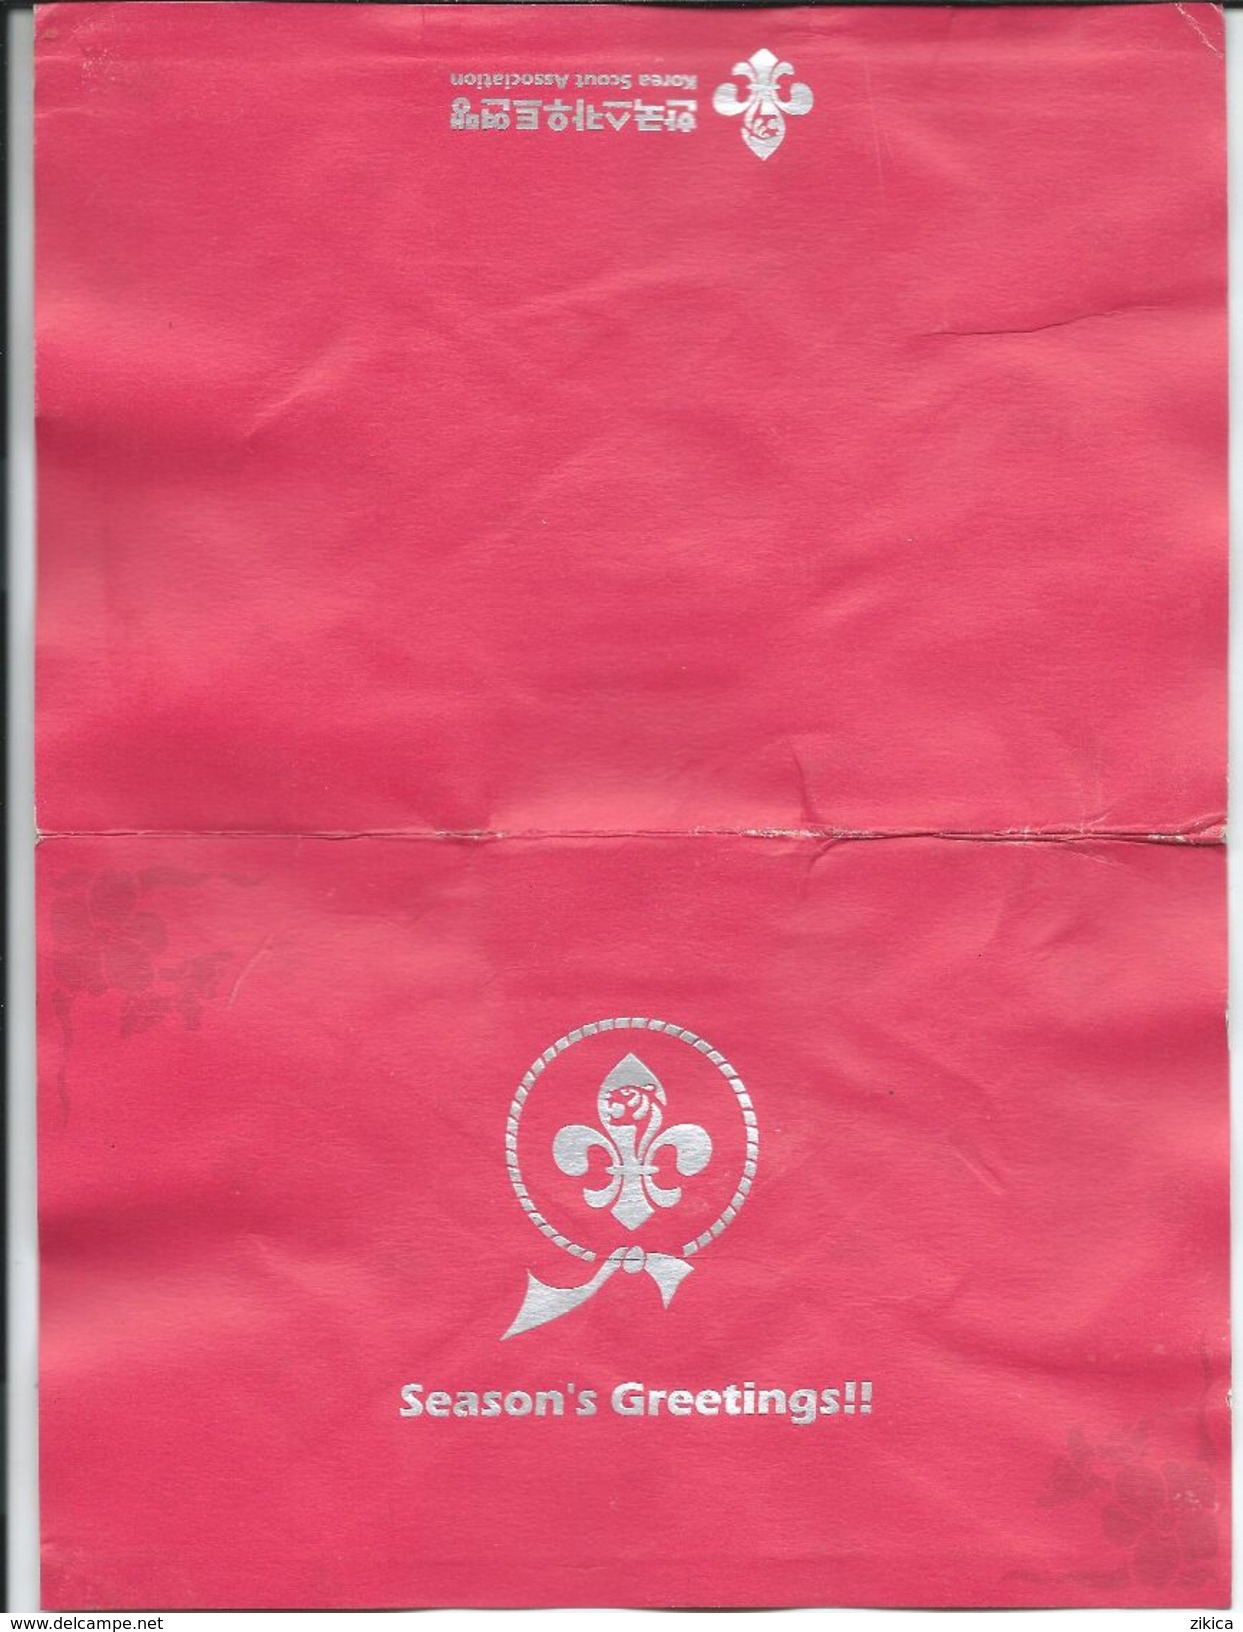 Scouting Postcard - Korea Scout Association .Merry Christmas And Happy New Year. - Pfadfinder-Bewegung